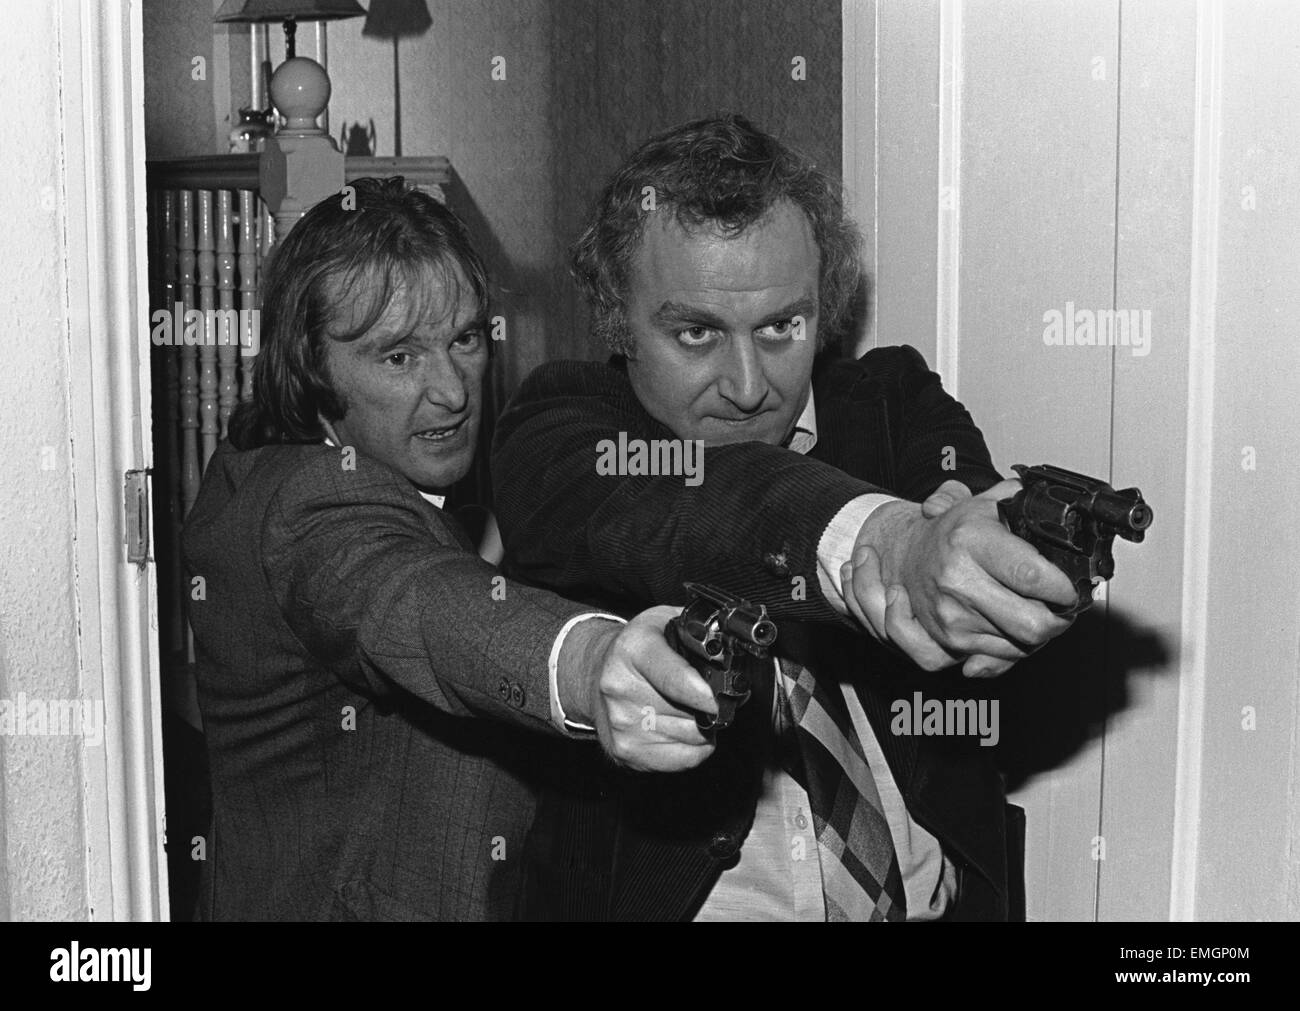 Detective Sergeant George Carter (left played by Dennis Waterman) and Detective Inspector John 'Jack' Regan (right played by John Thaw) seen here during rehearsals before a take on the set of the Euston Films TV series The Sweeney. The series focuses on the Flying Squad, a branch of the Metropolitan Police tasked with tackling armed robbery and violent crime in London. The programme's title derives from Sweeney Todd, which is Cockney rhyming slang for 'Flying Squad'. 8th December 1975 Stock Photo